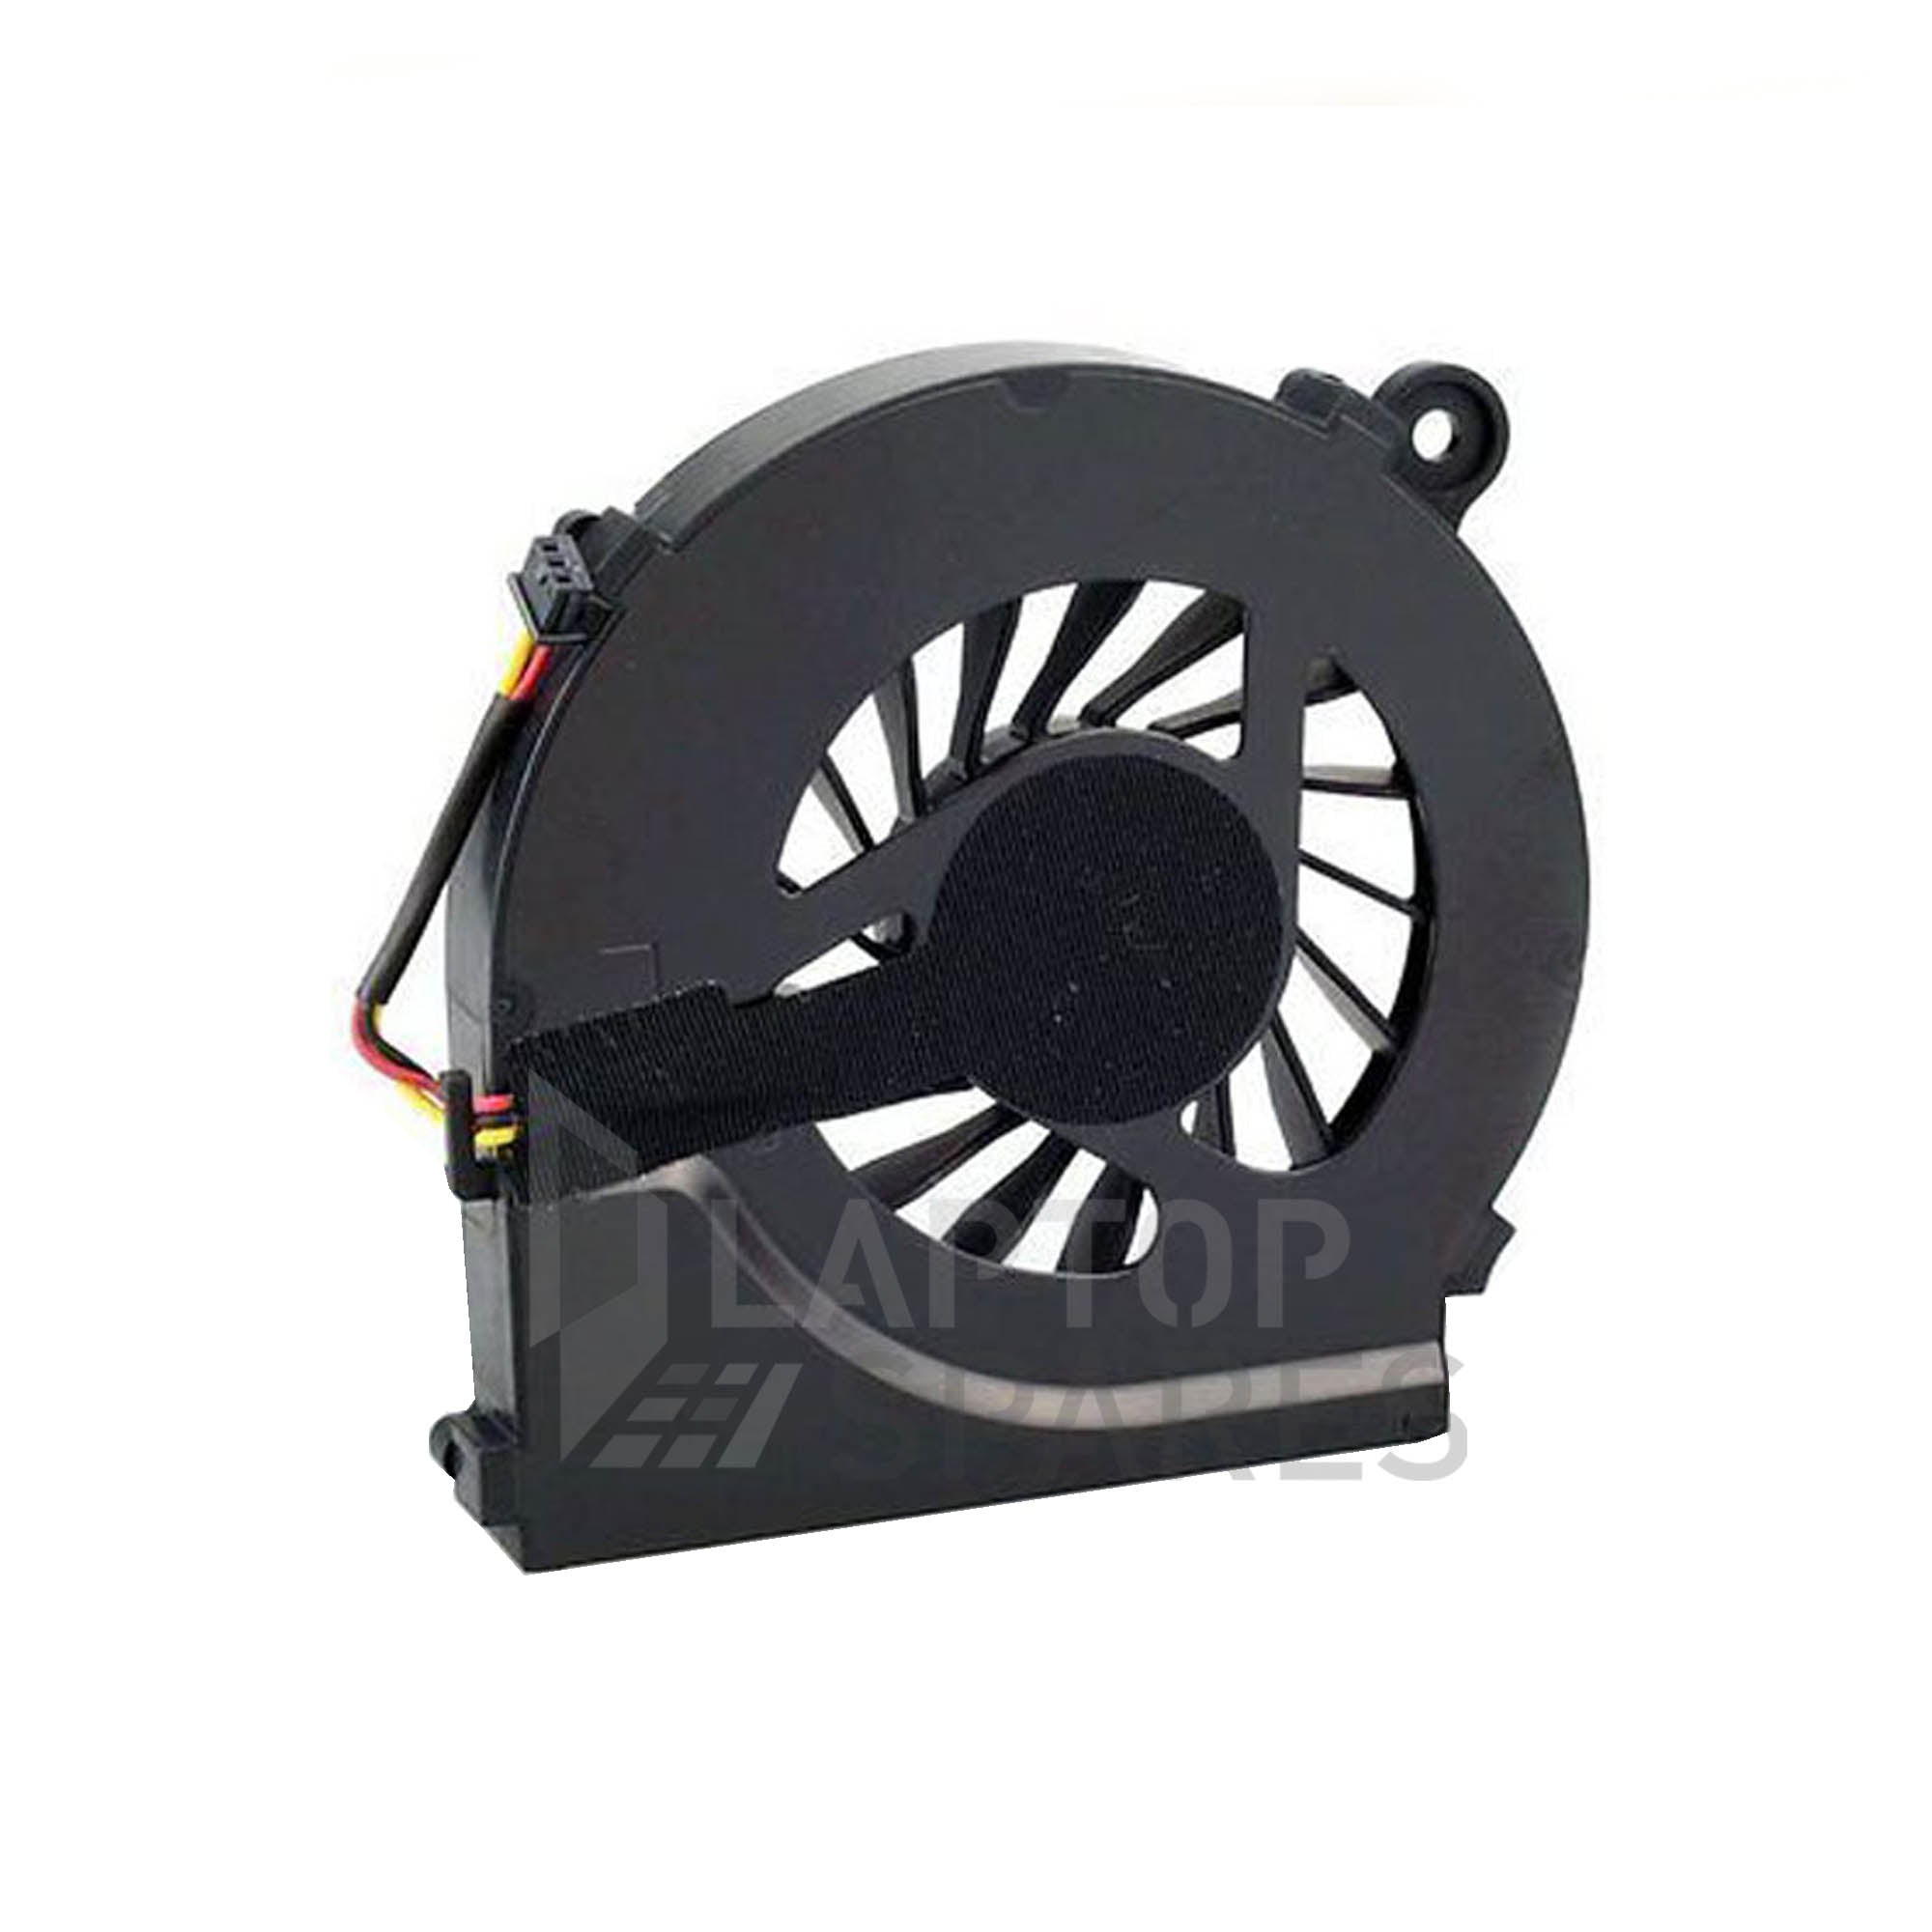 Hp 1000 3 Wire Cpu Cooling Fan Price In Pakistan Laptop Spares